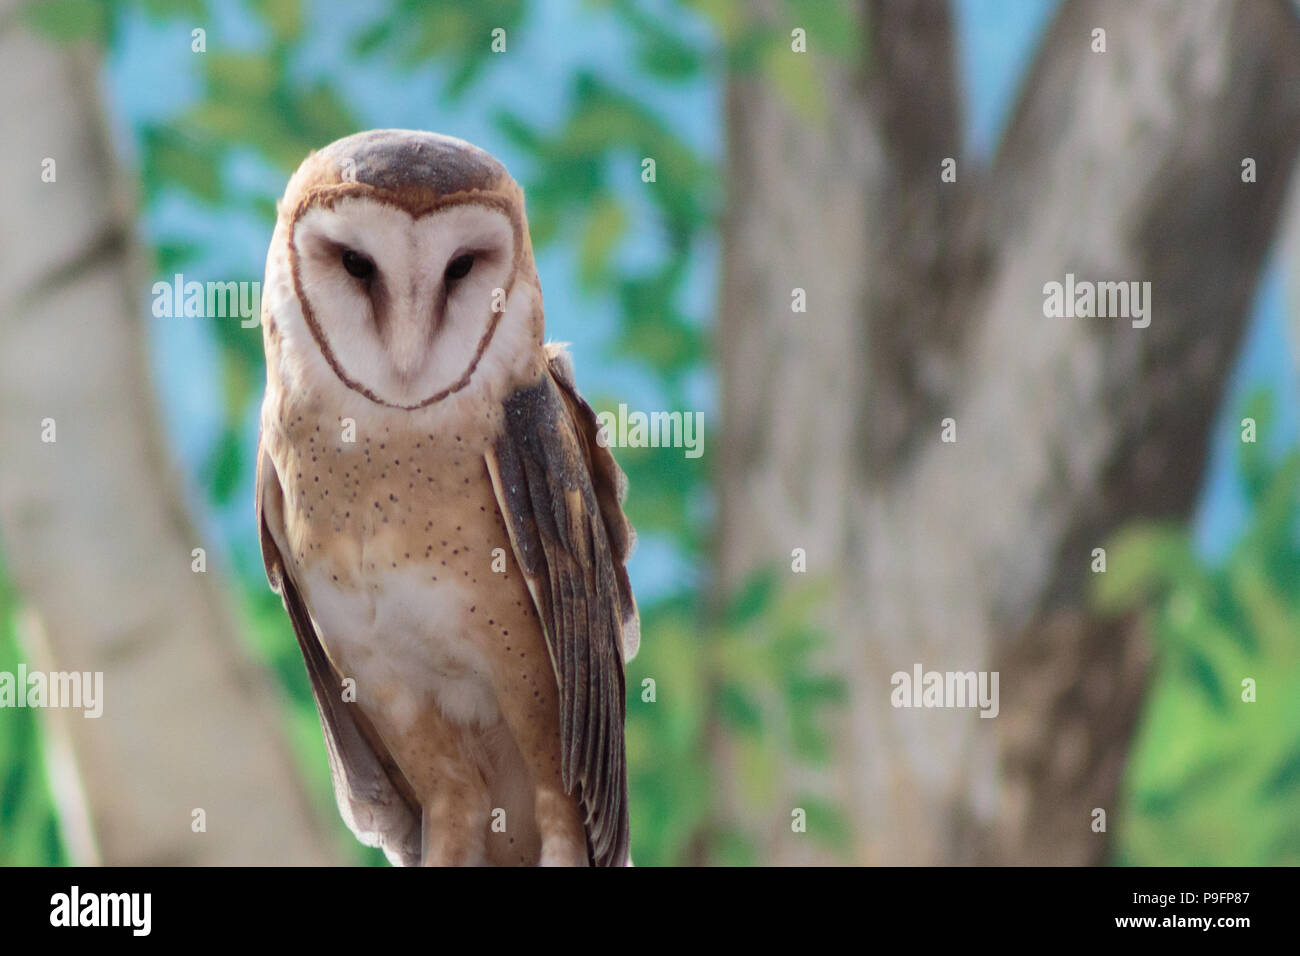 A barn owl's heart shaped face looking down at you Stock Photo